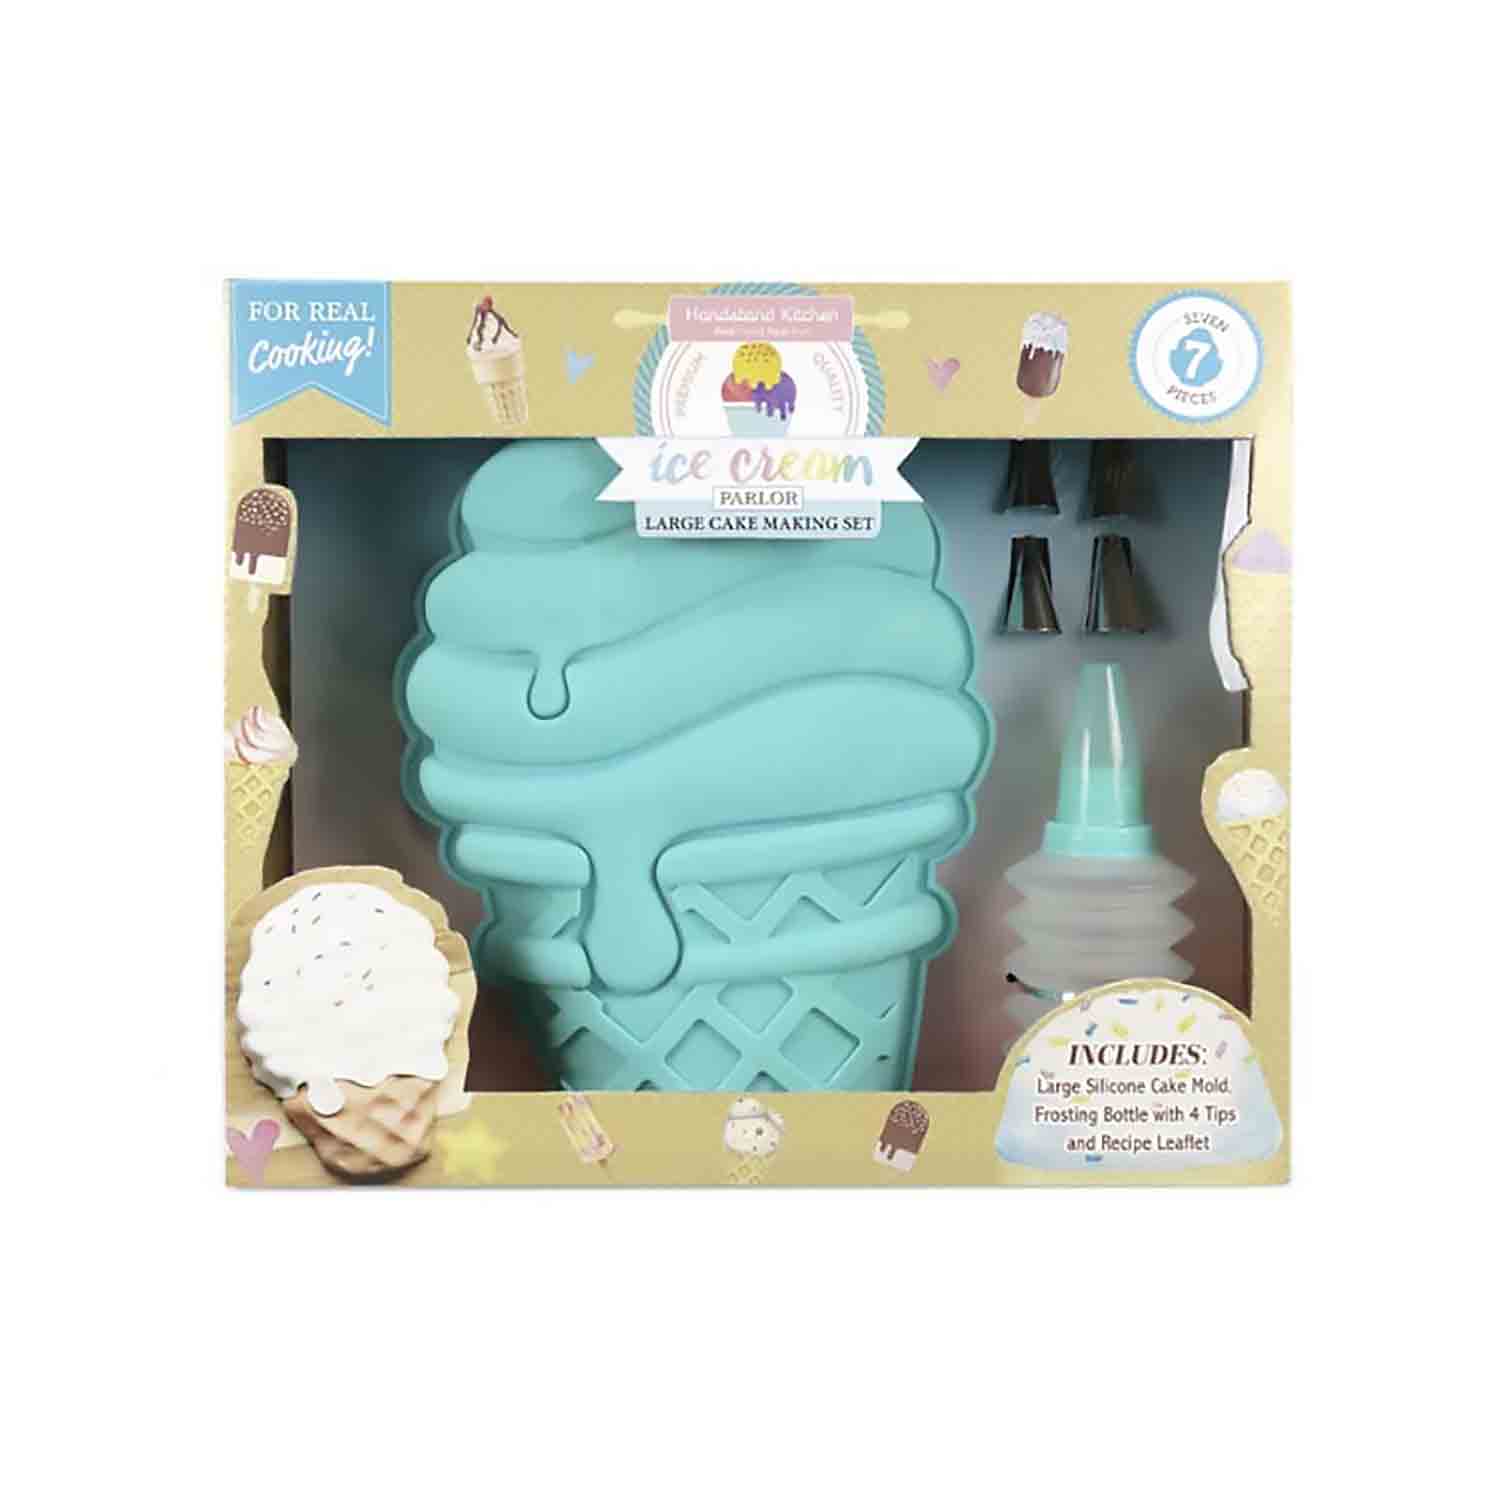 Handstand Kitchen Ice Cream Parlor Mini Popsicle Mold